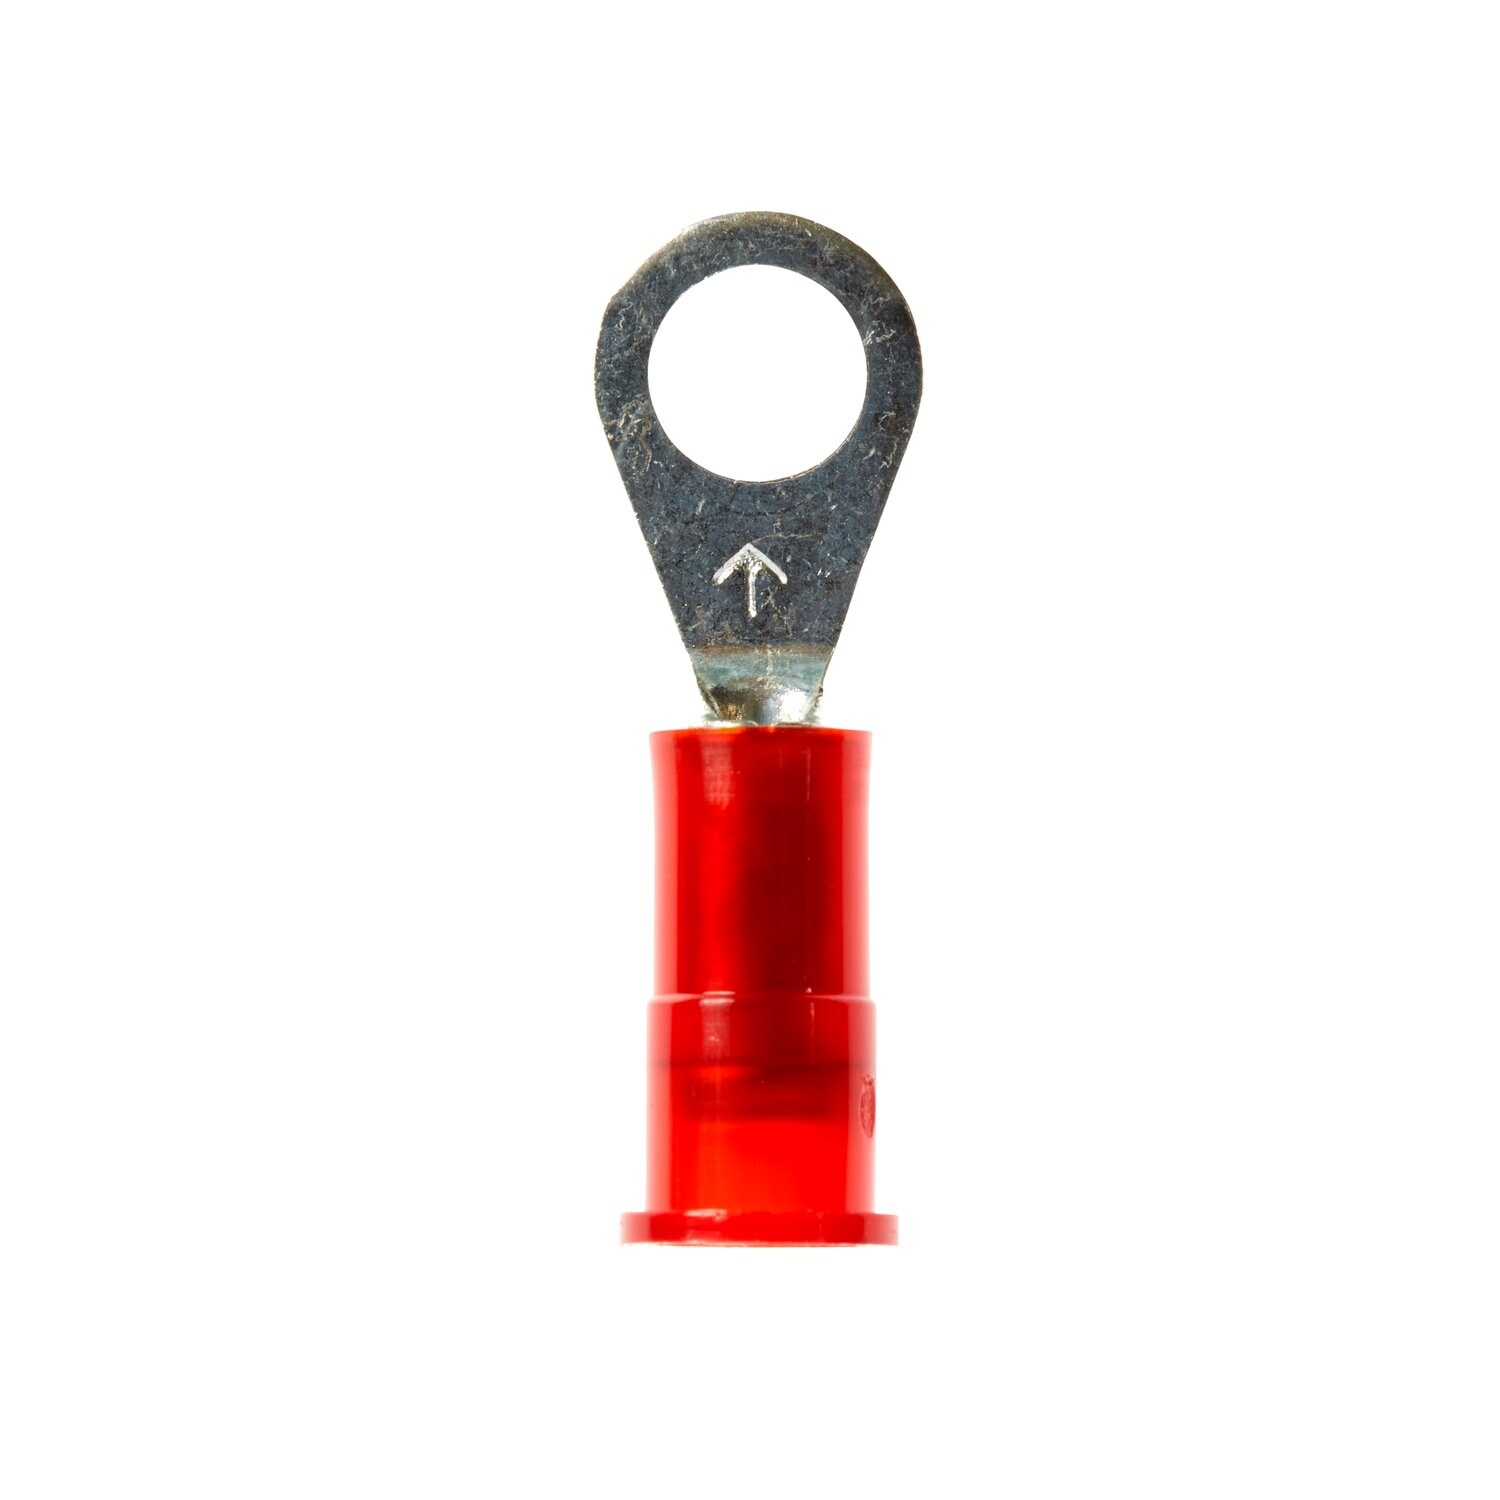 7000133271 - 3M Scotchlok Ring Nylon Insulated, 100/bottle, MNG18-6R/SX,
standard-style ring tongue fits around the stud, 500/Case